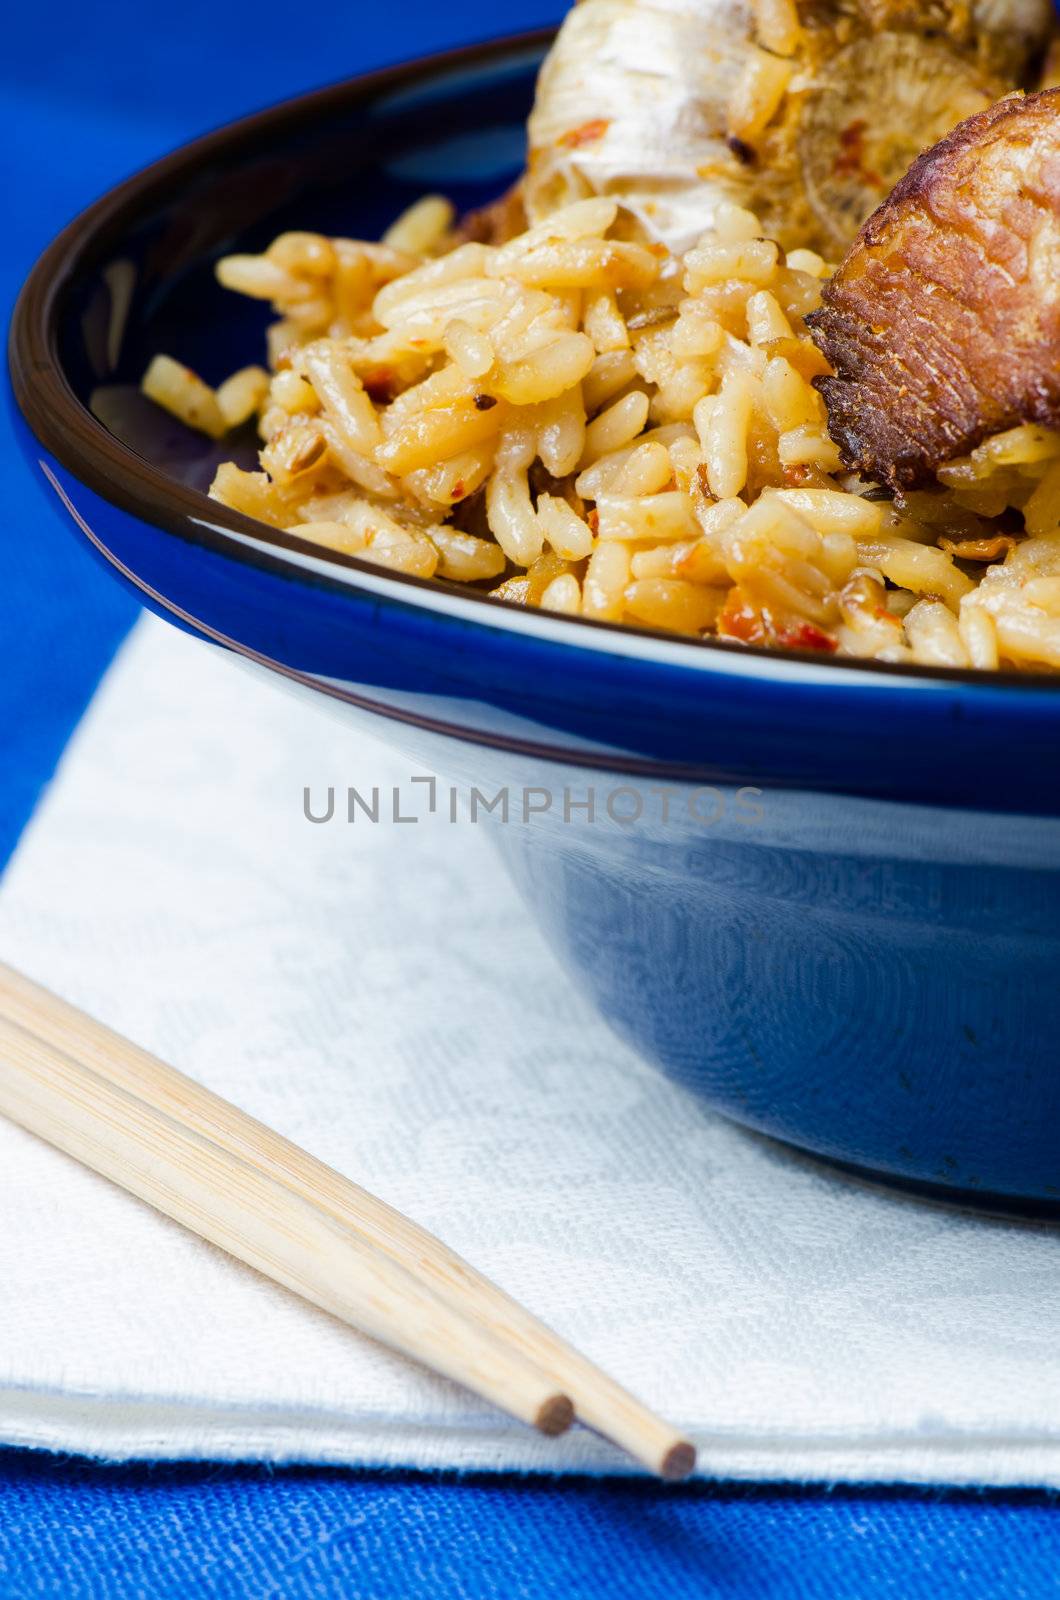 Rice with meat in blue bowl